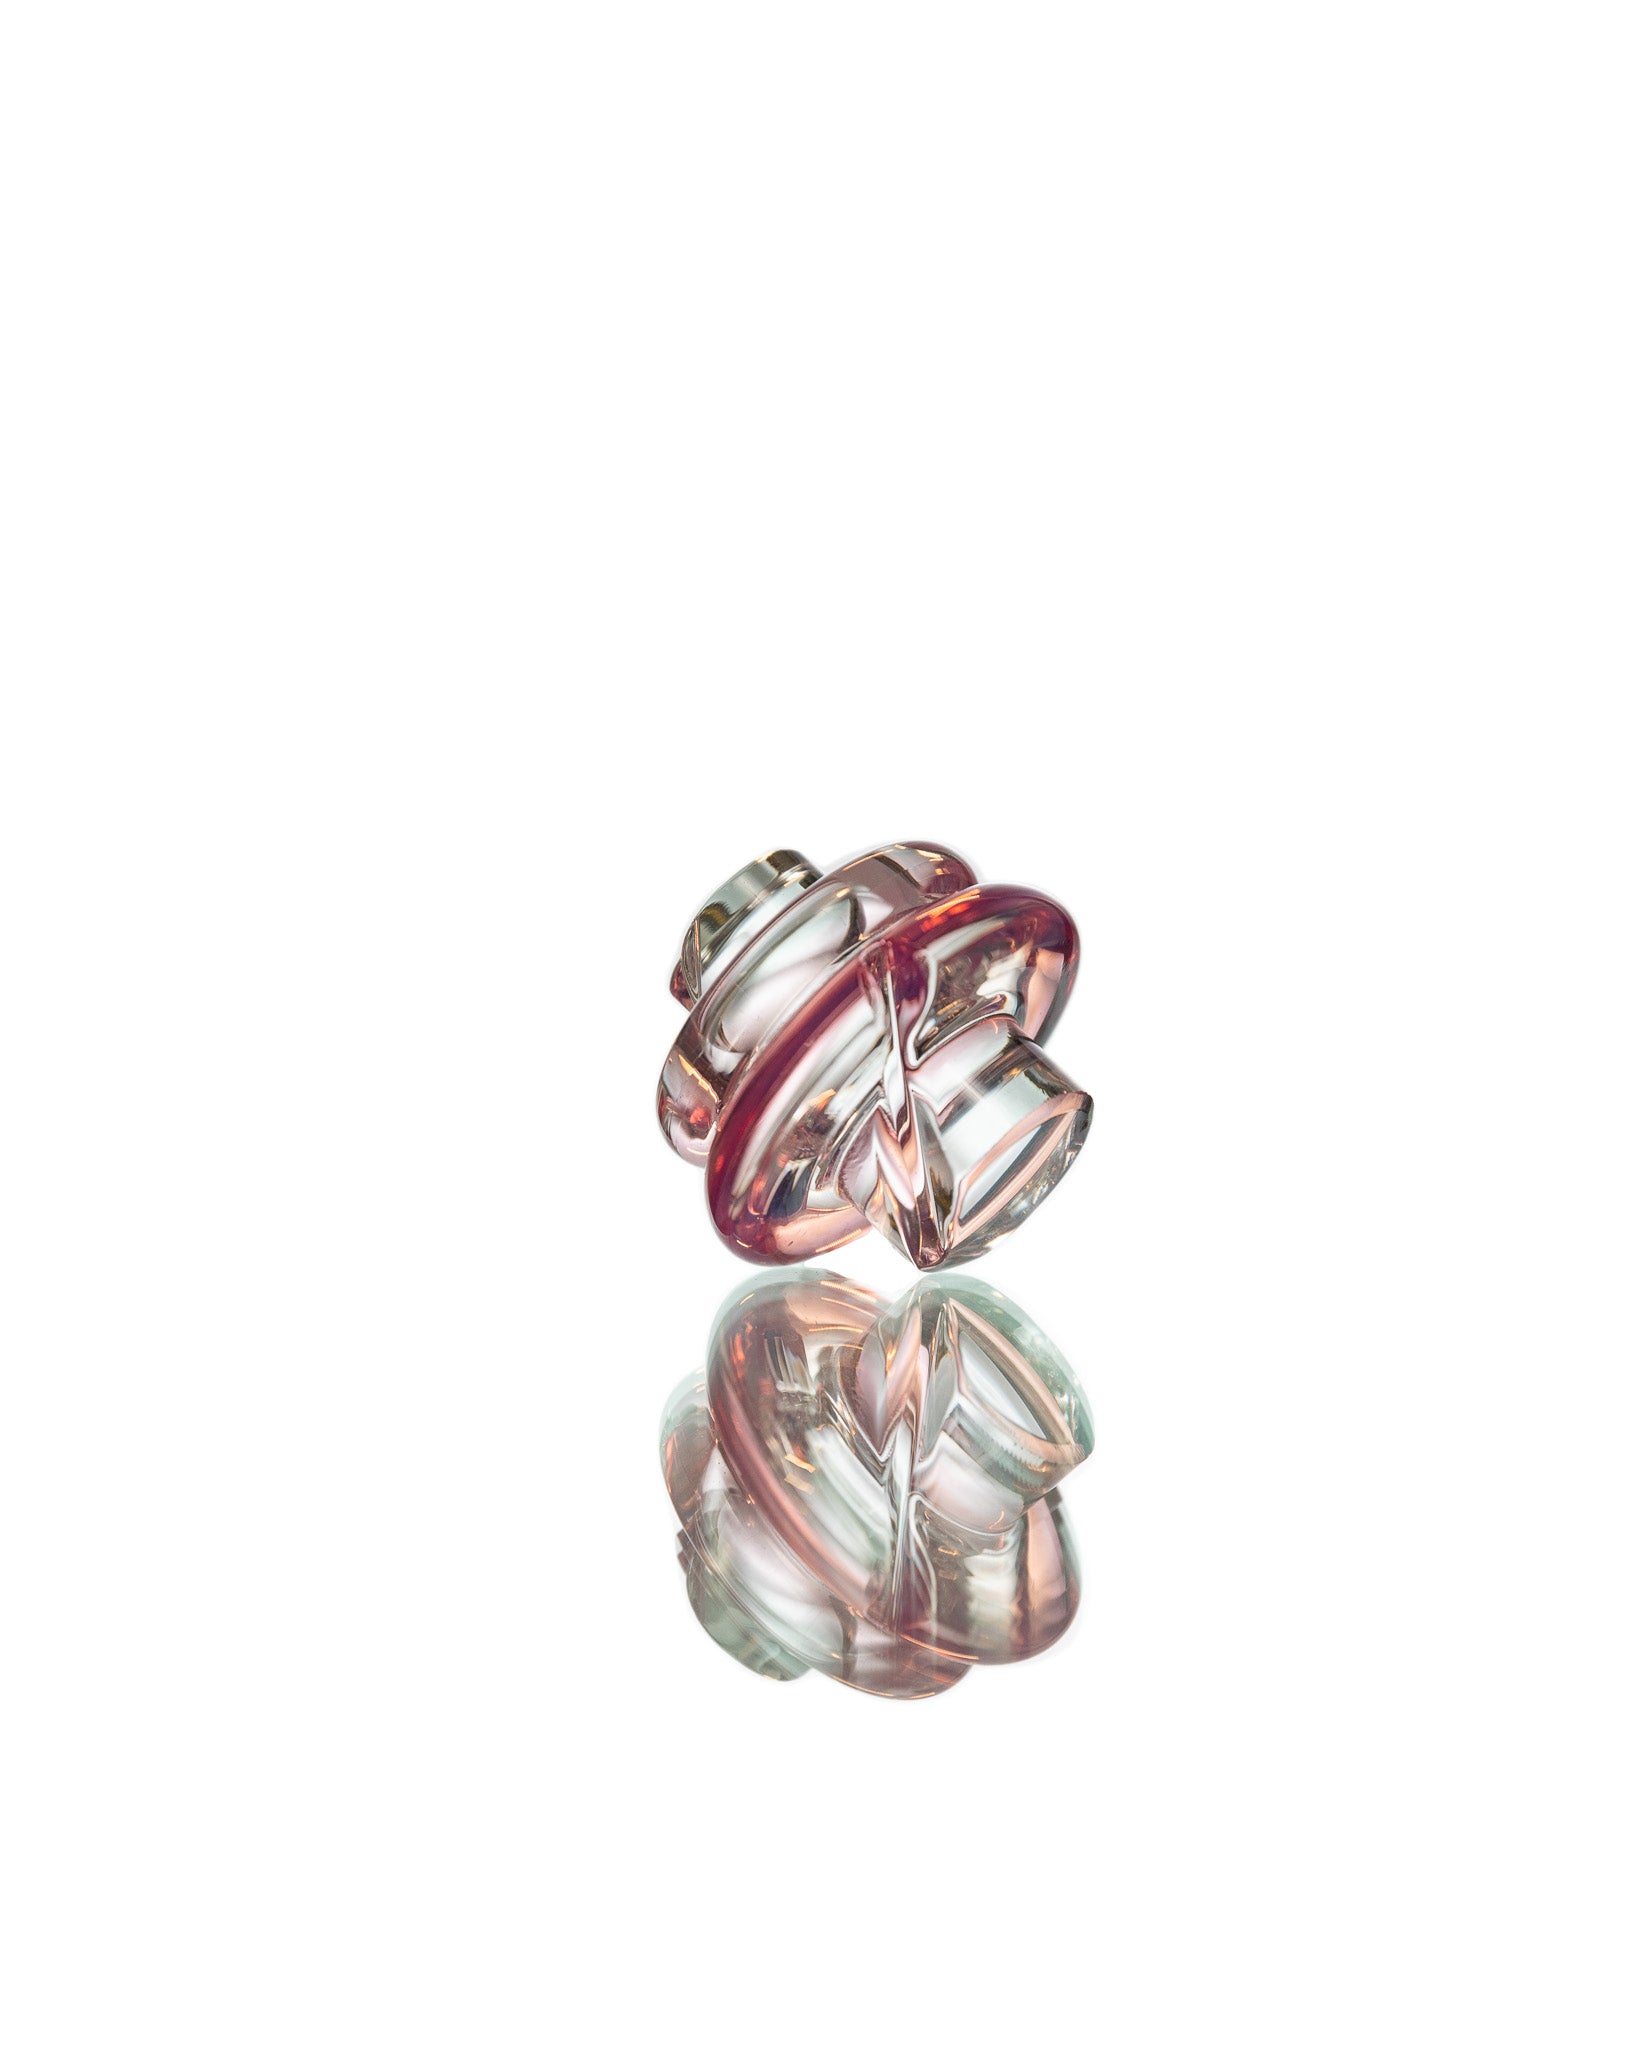 One Trick Pony - "Pink Slyme" Multipass "Rockulus" Spinner Cap